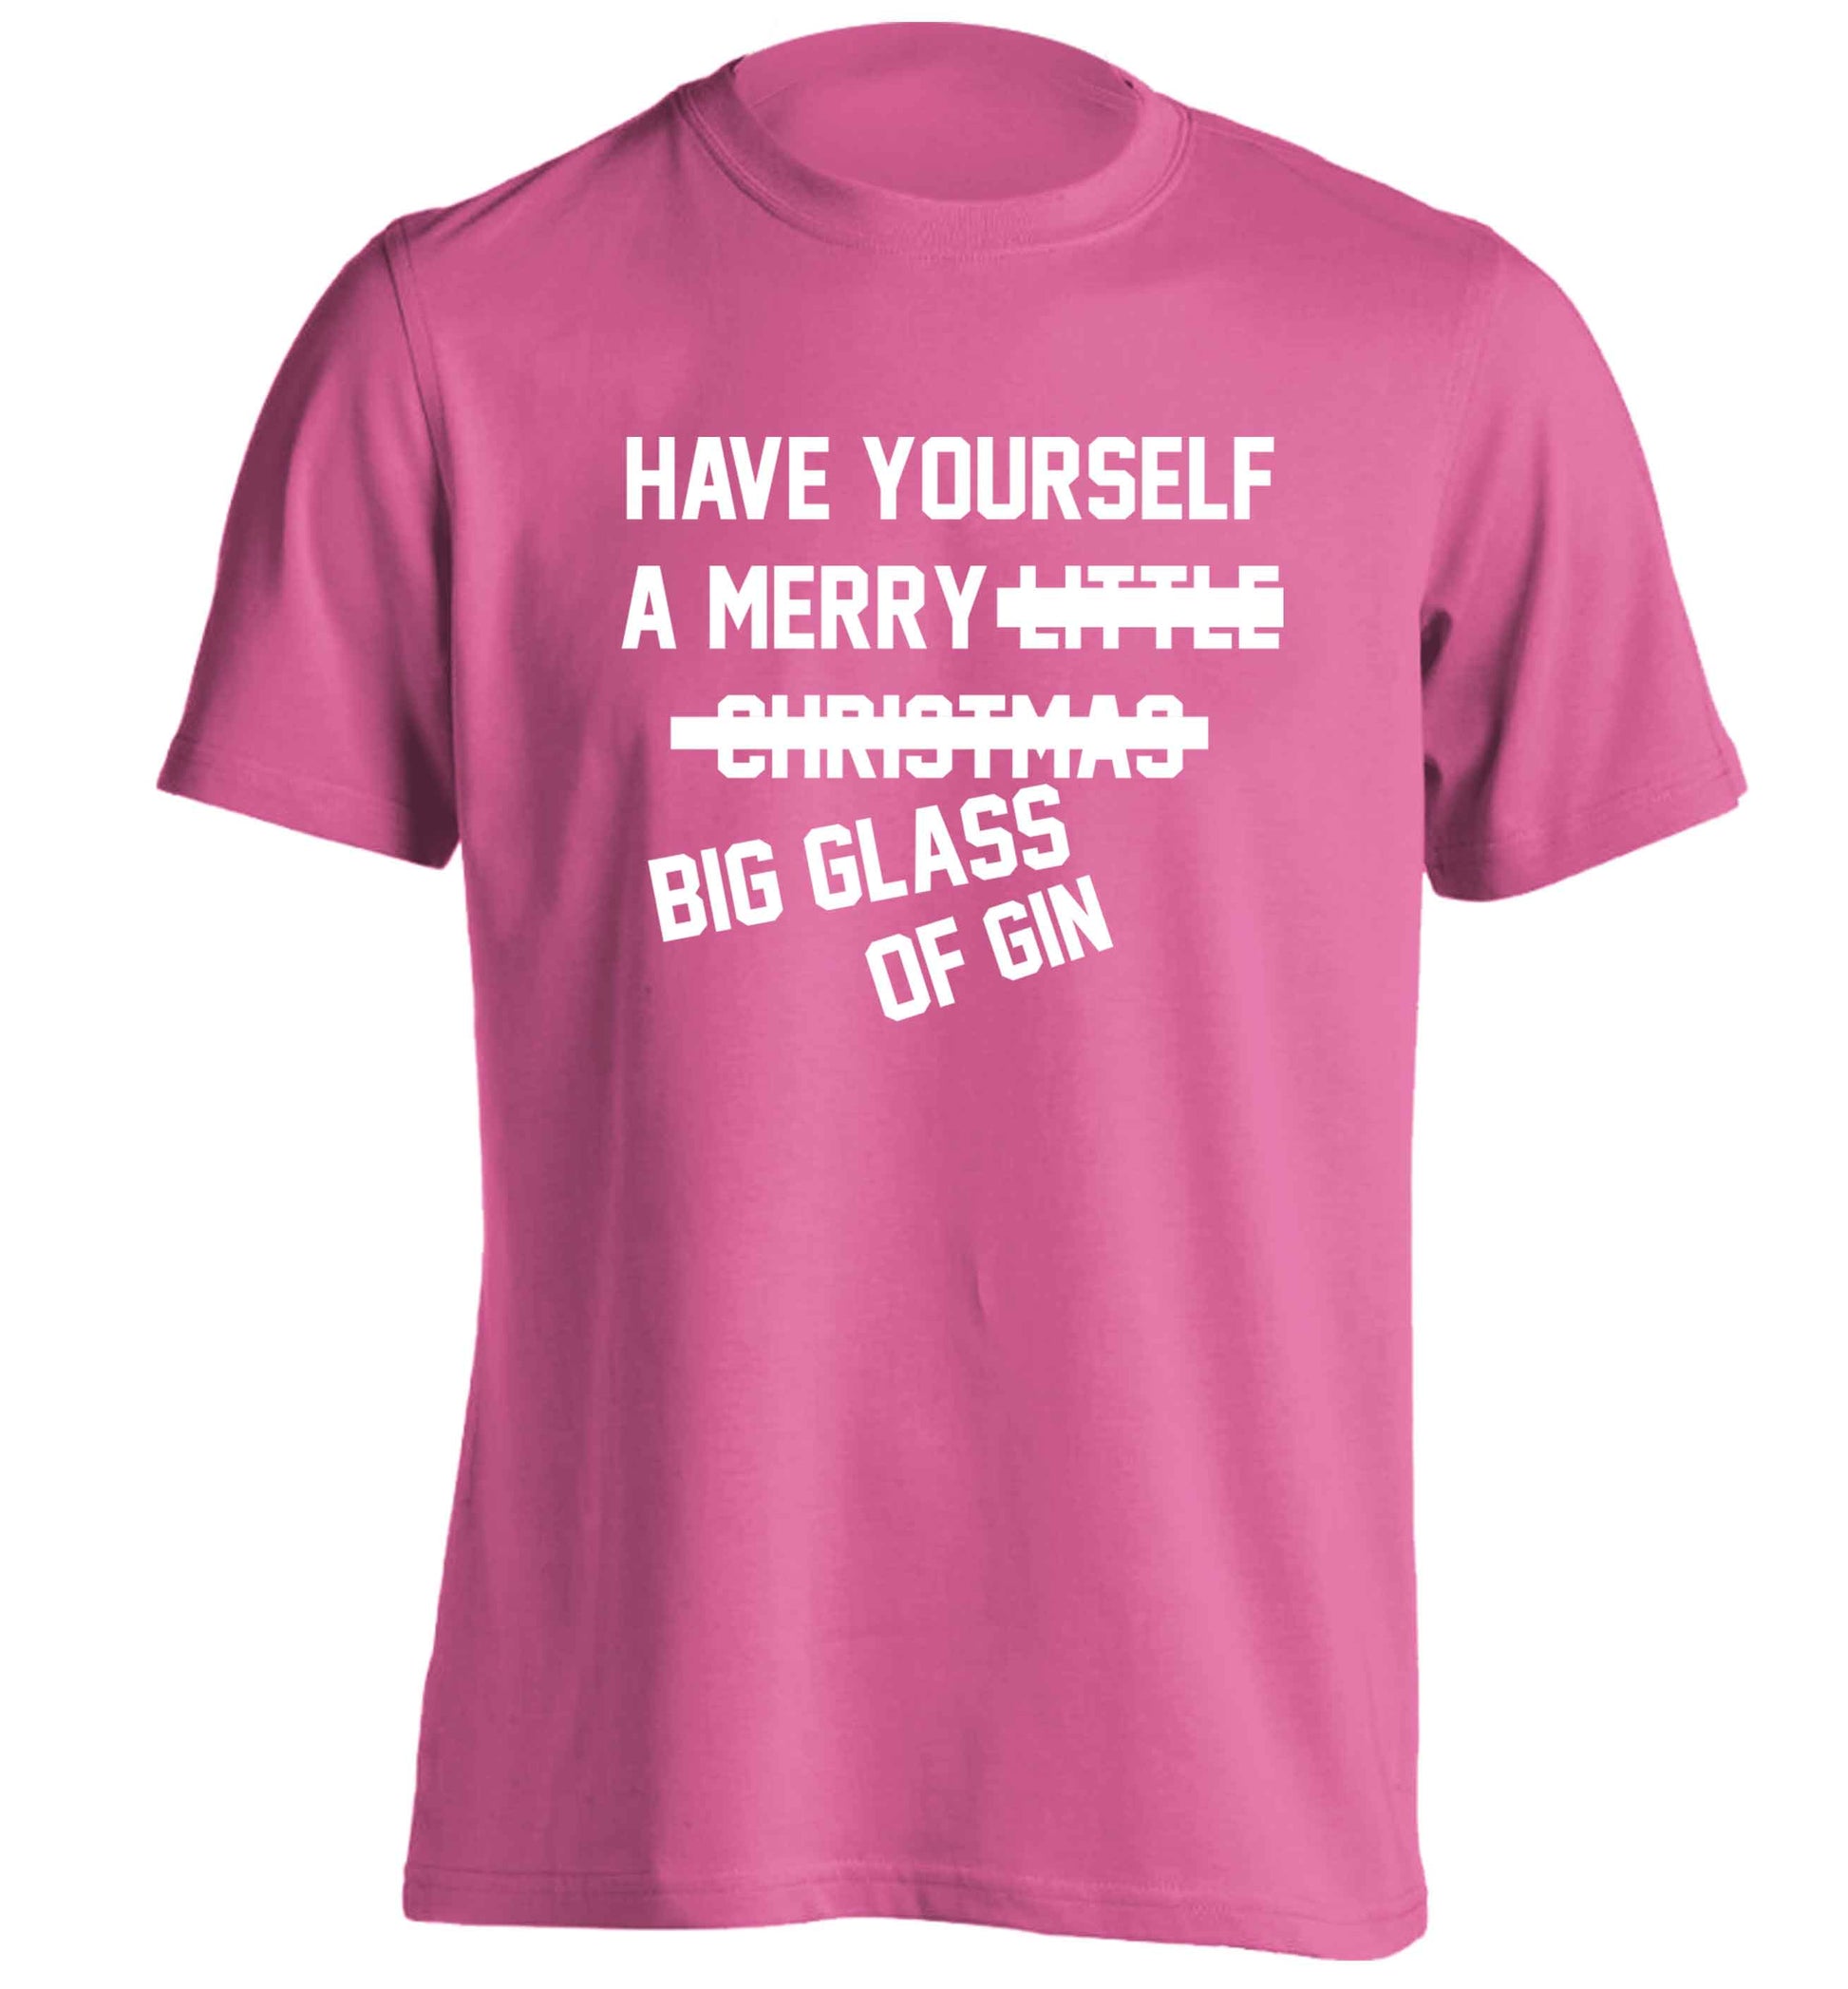 Have yourself a merry big glass of gin adults unisex pink Tshirt 2XL